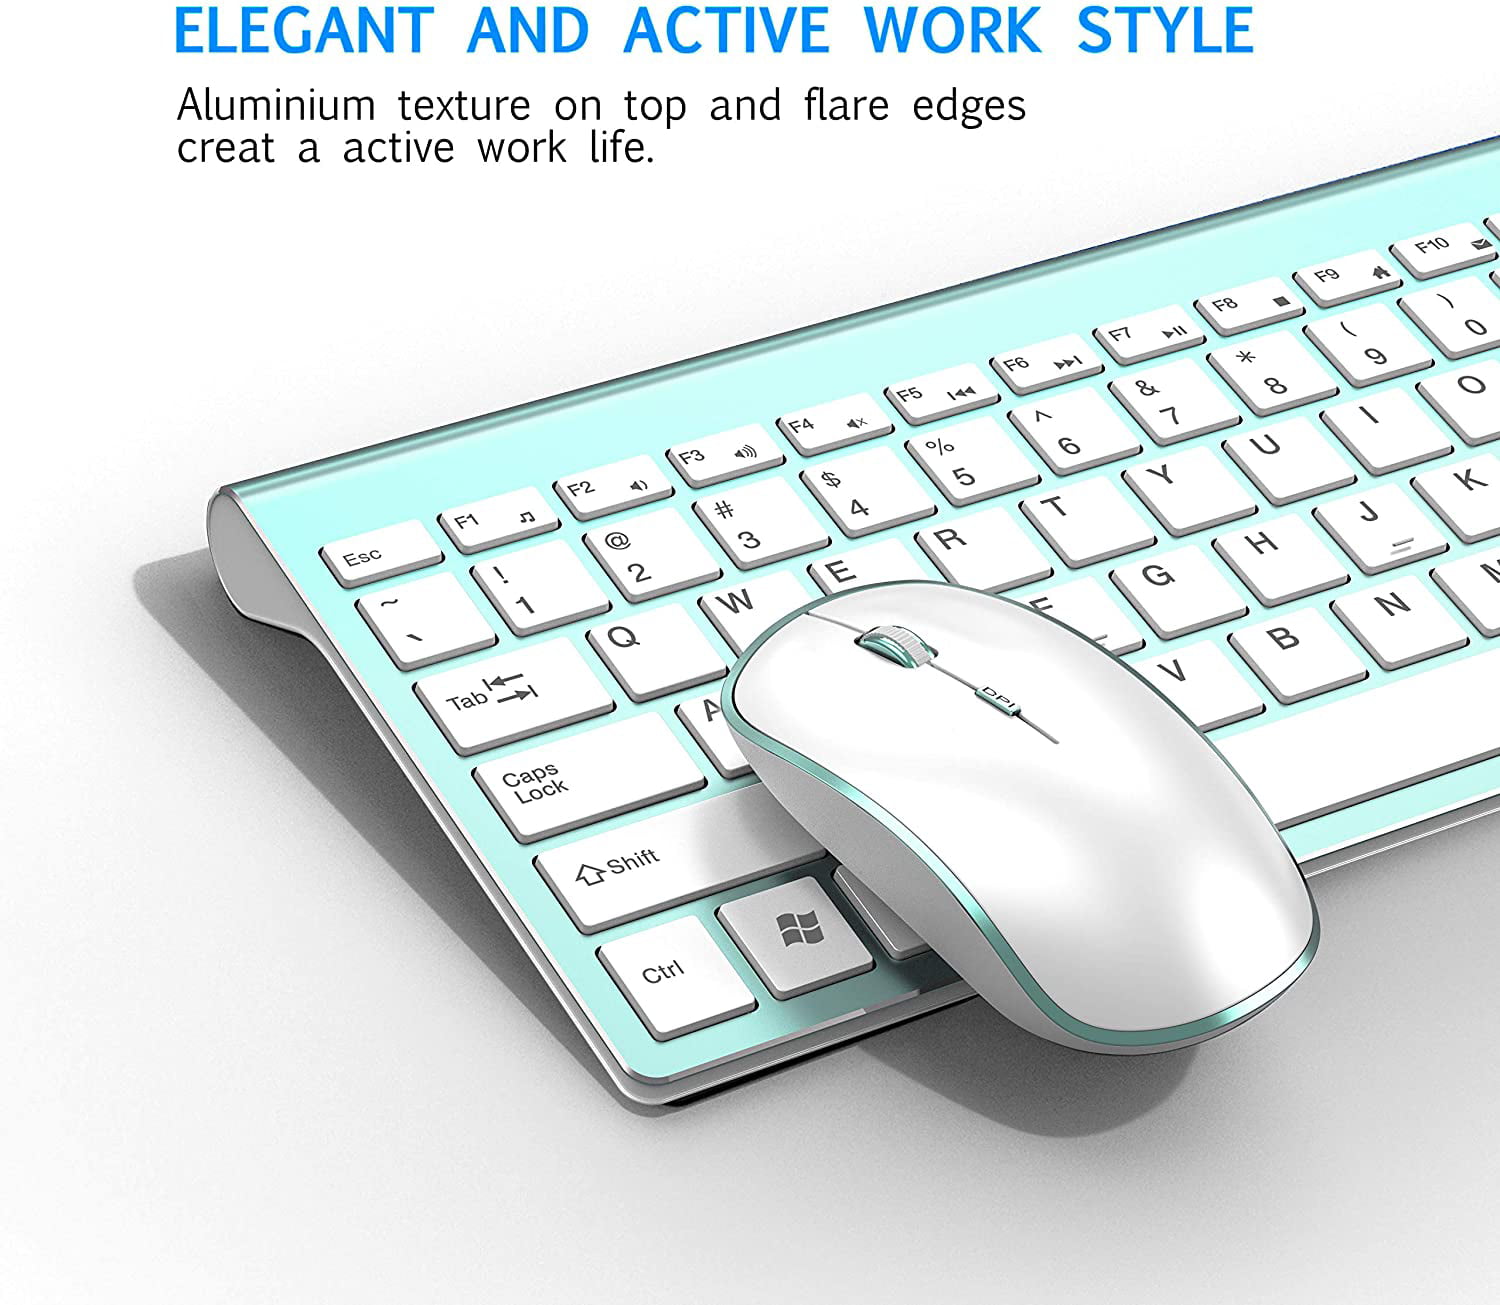 travel keyboard and mouse for laptop